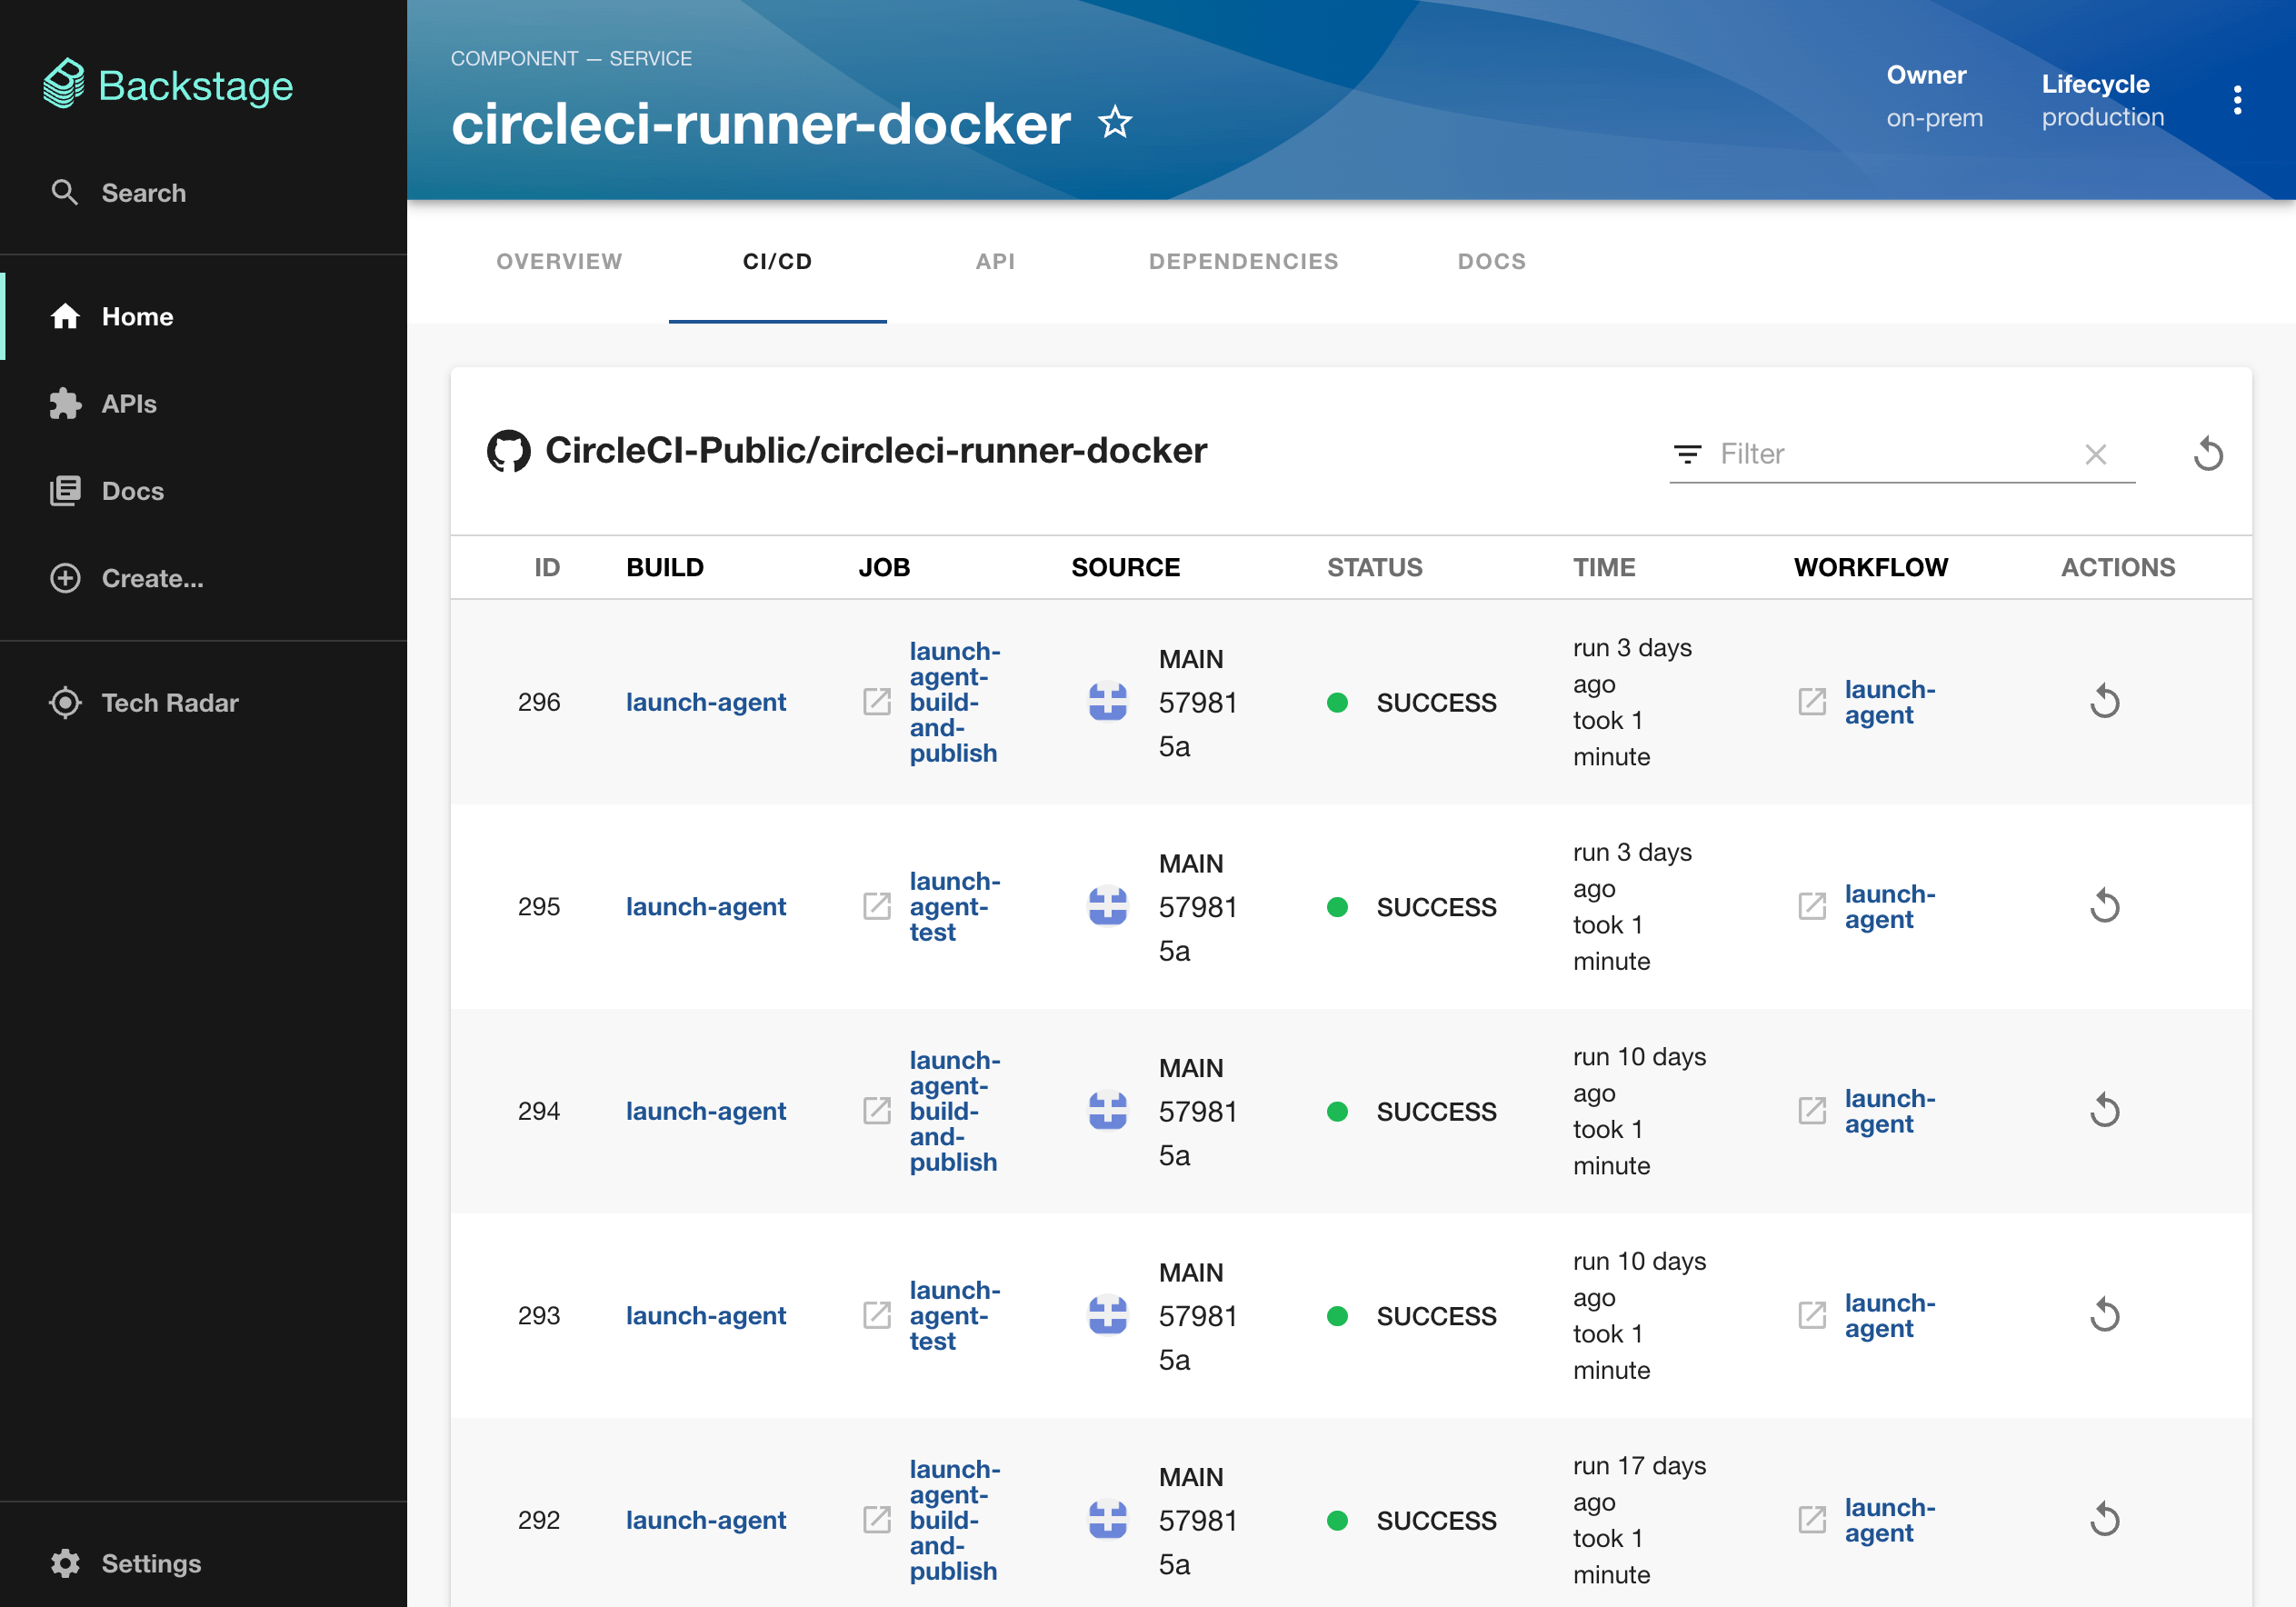 A list of the most recent CircleCI builds.